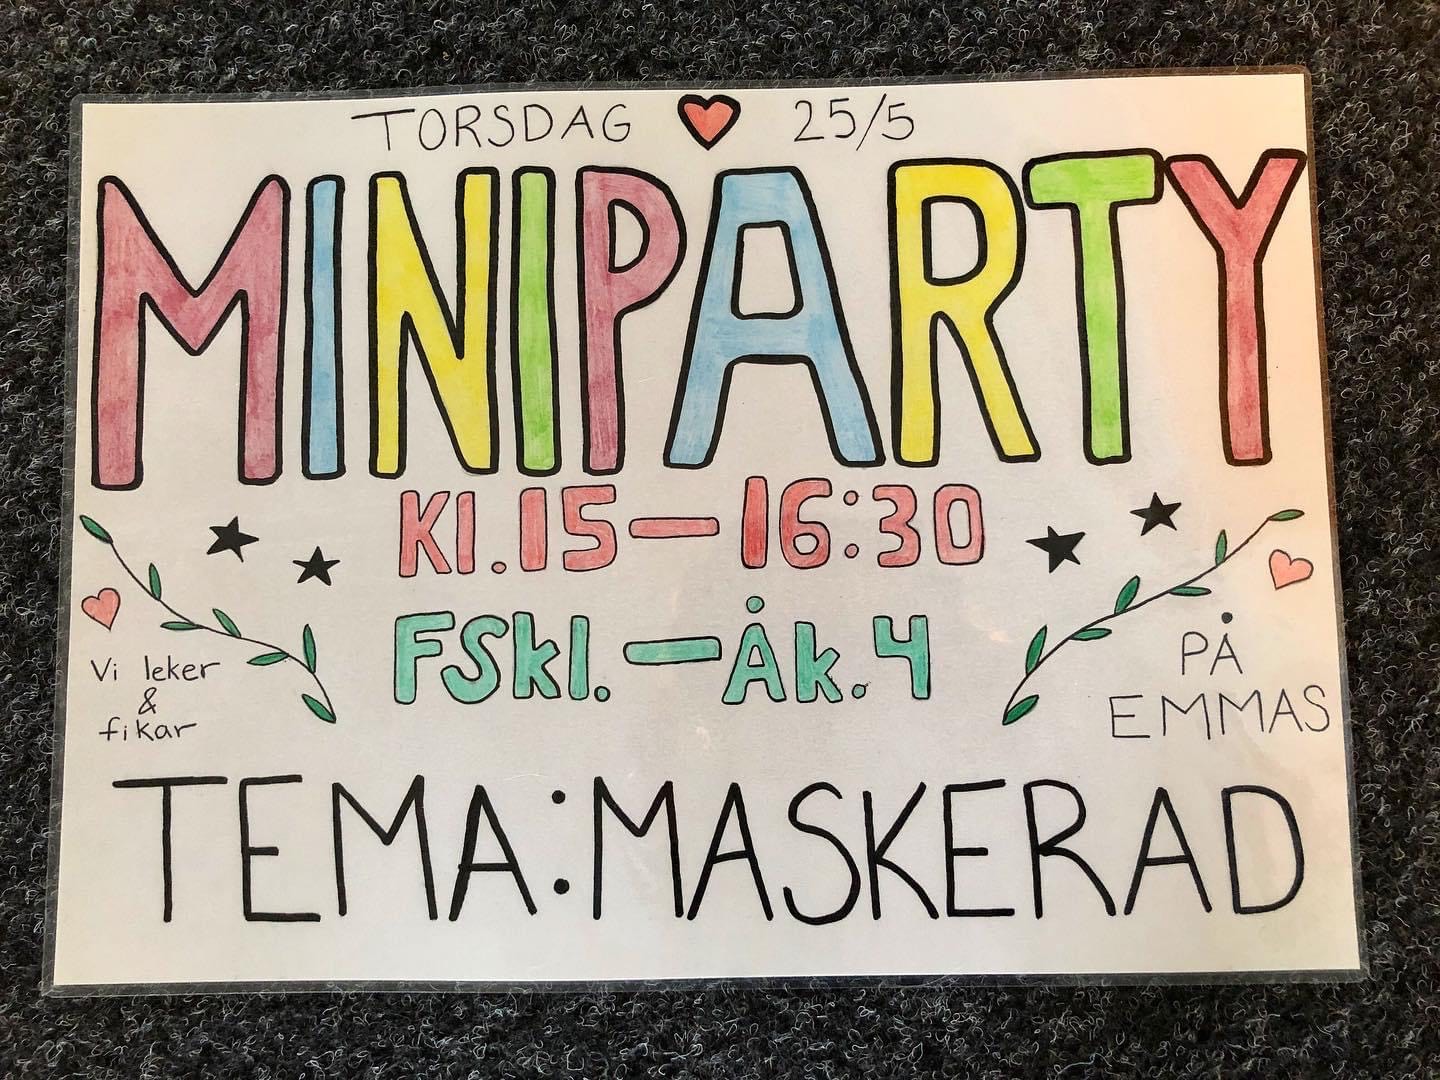 Miniparty